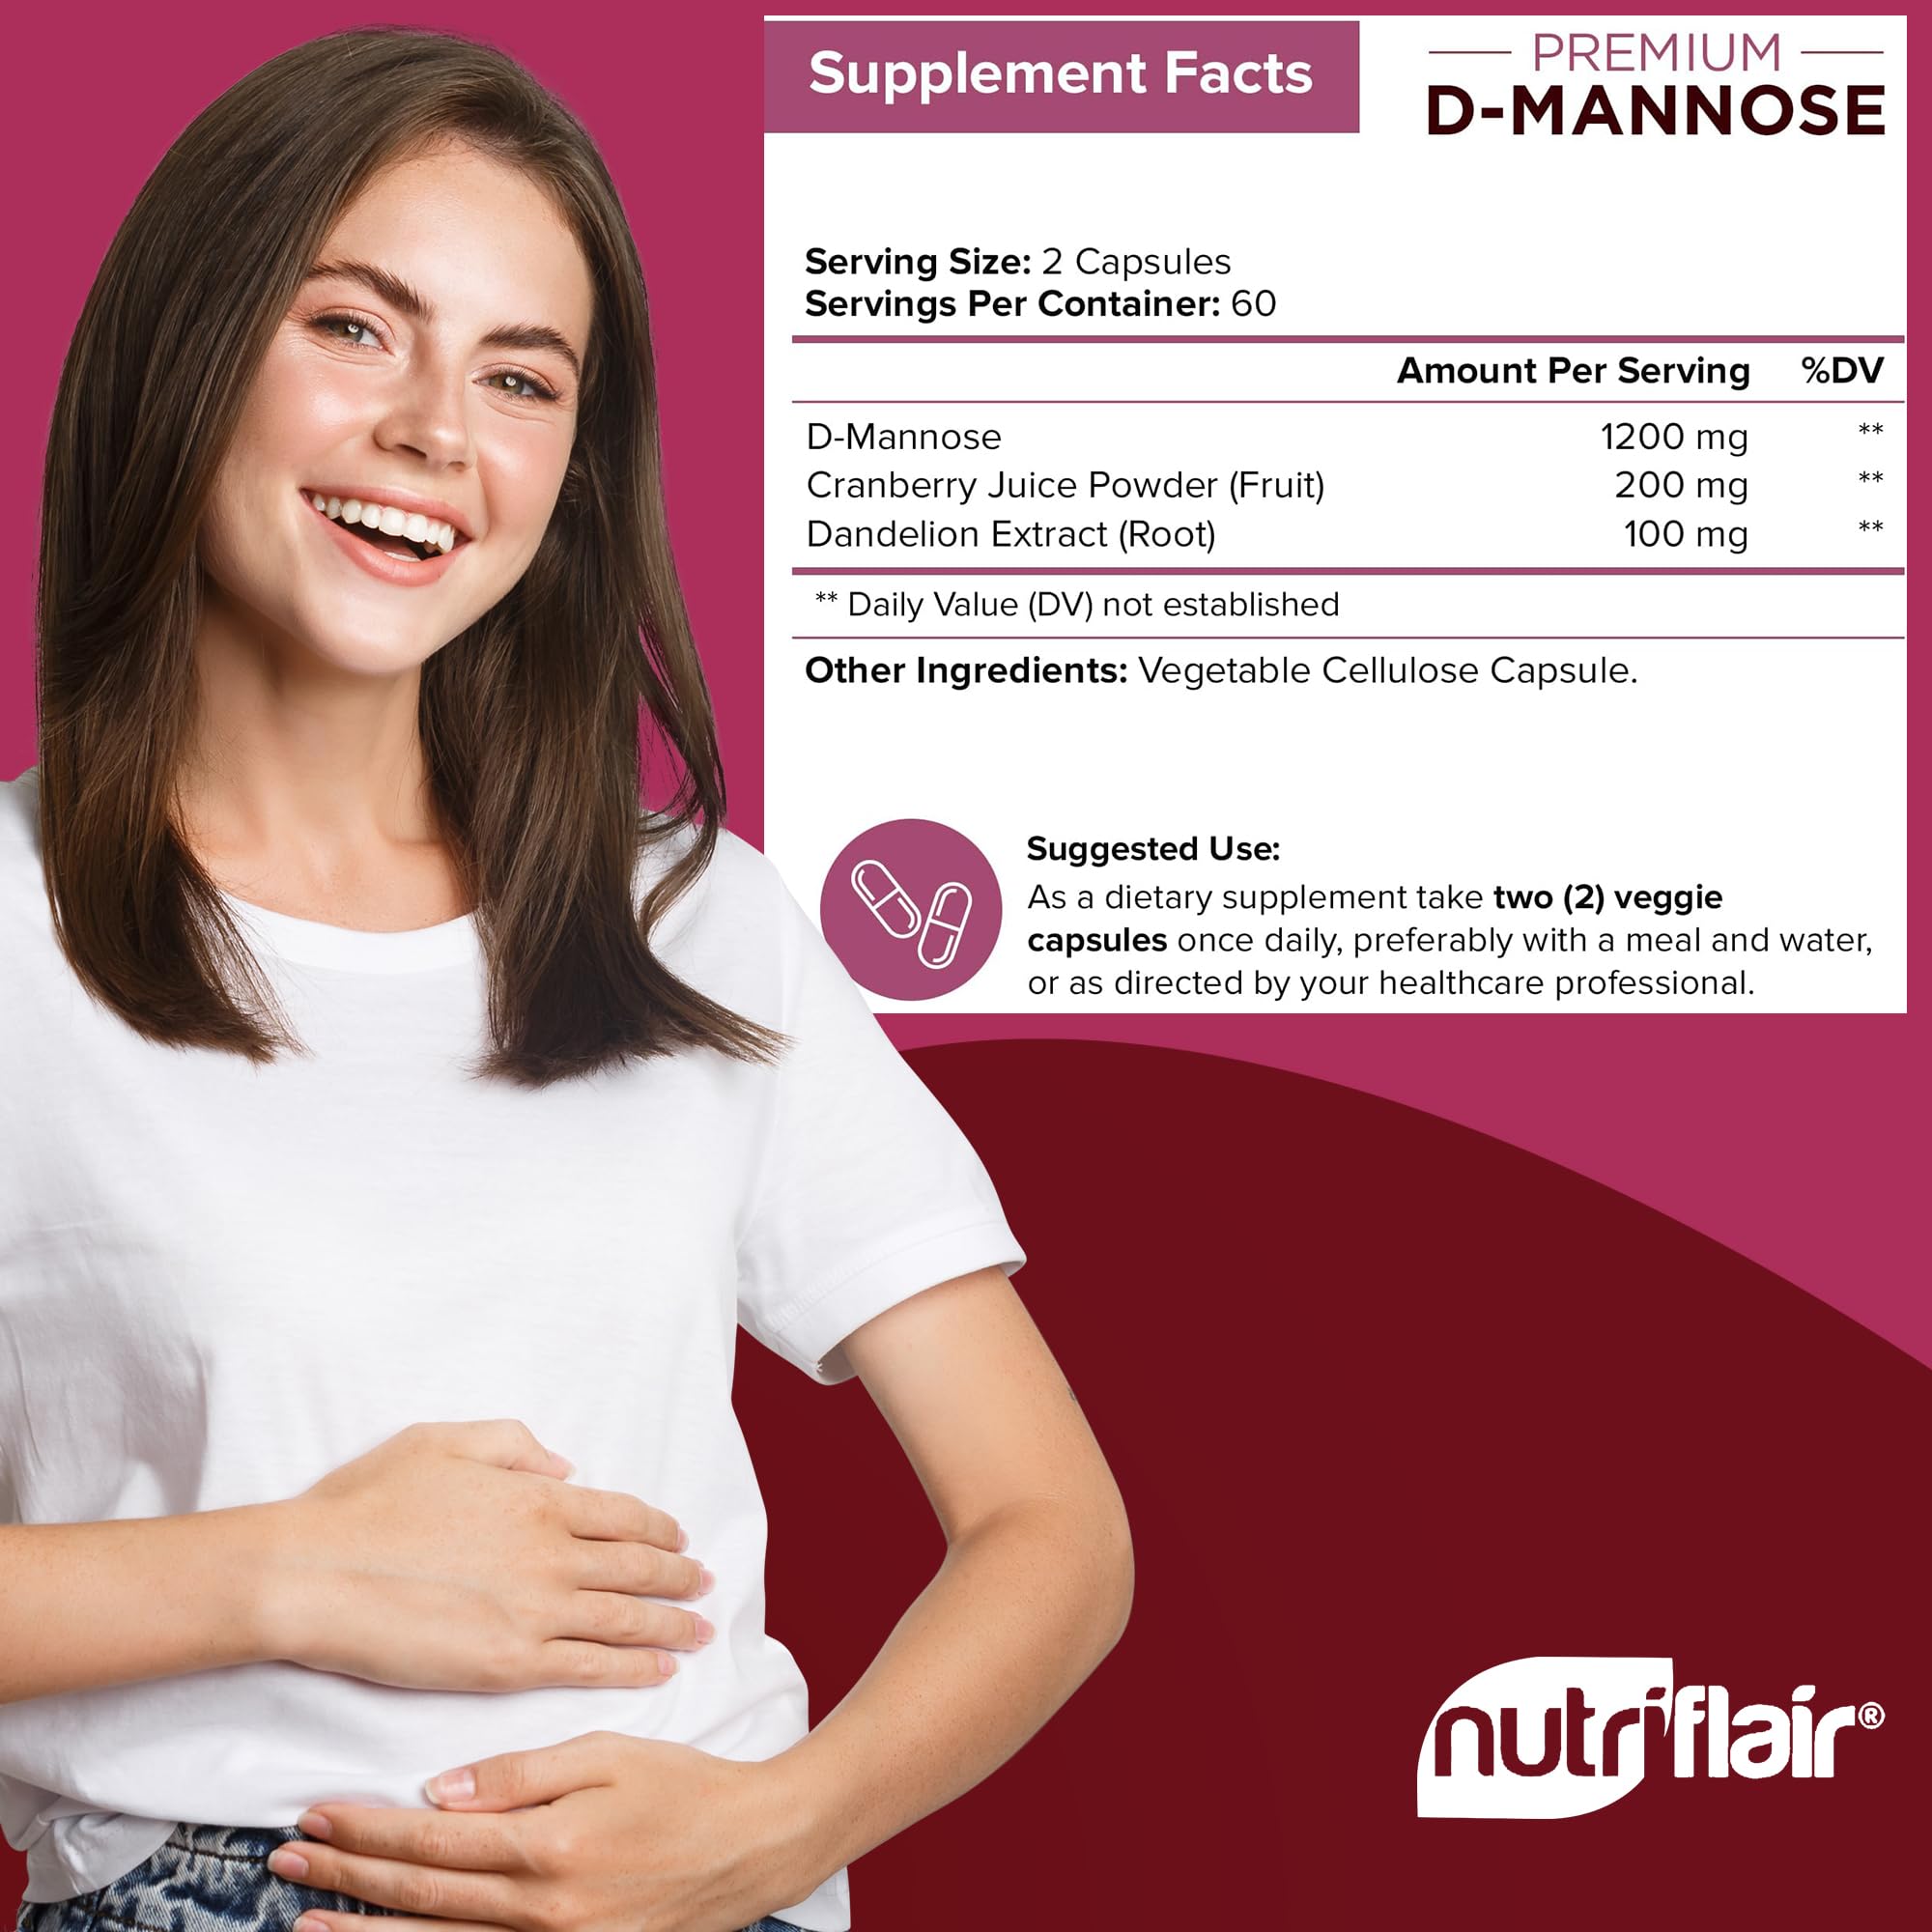 NutriFlair D-Mannose 1200mg UTI Support with Cranberry & Dandelion Extract